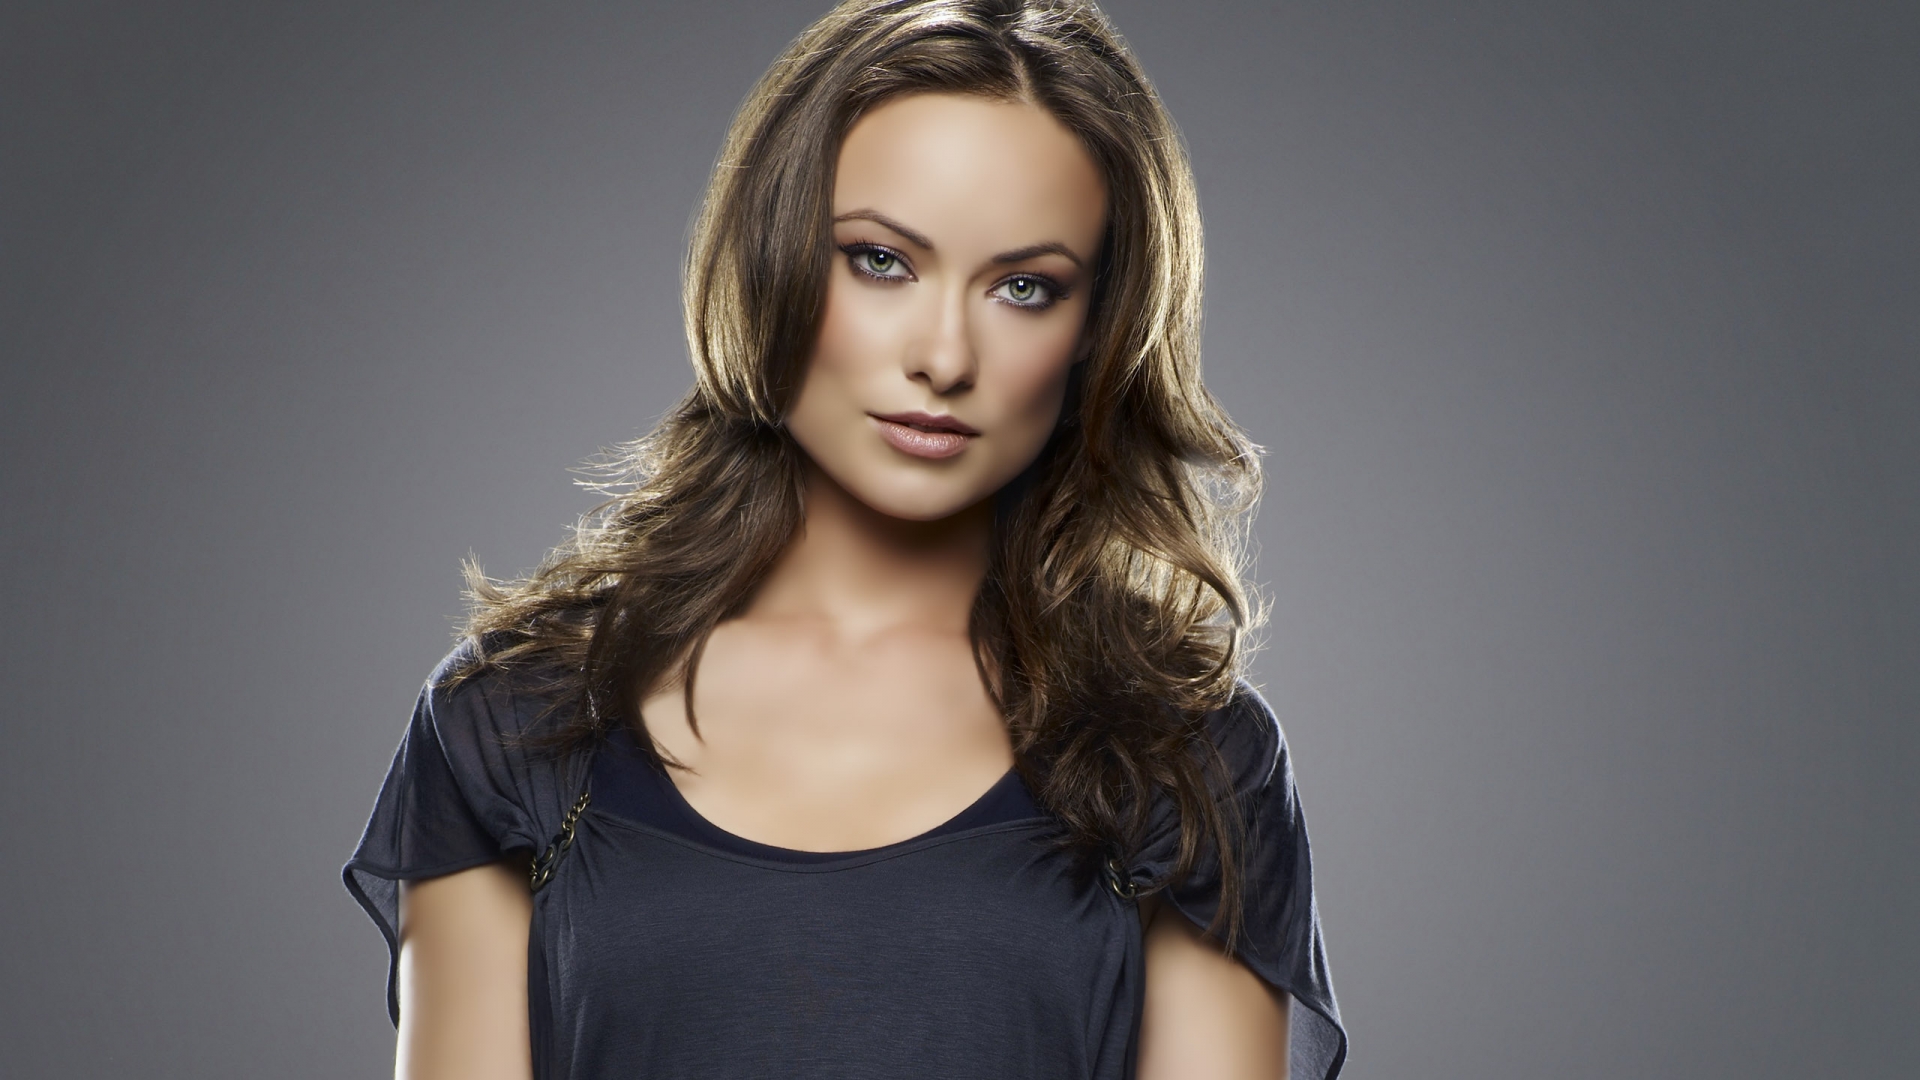 Olivia Wilde Actress for 1920 x 1080 HDTV 1080p resolution